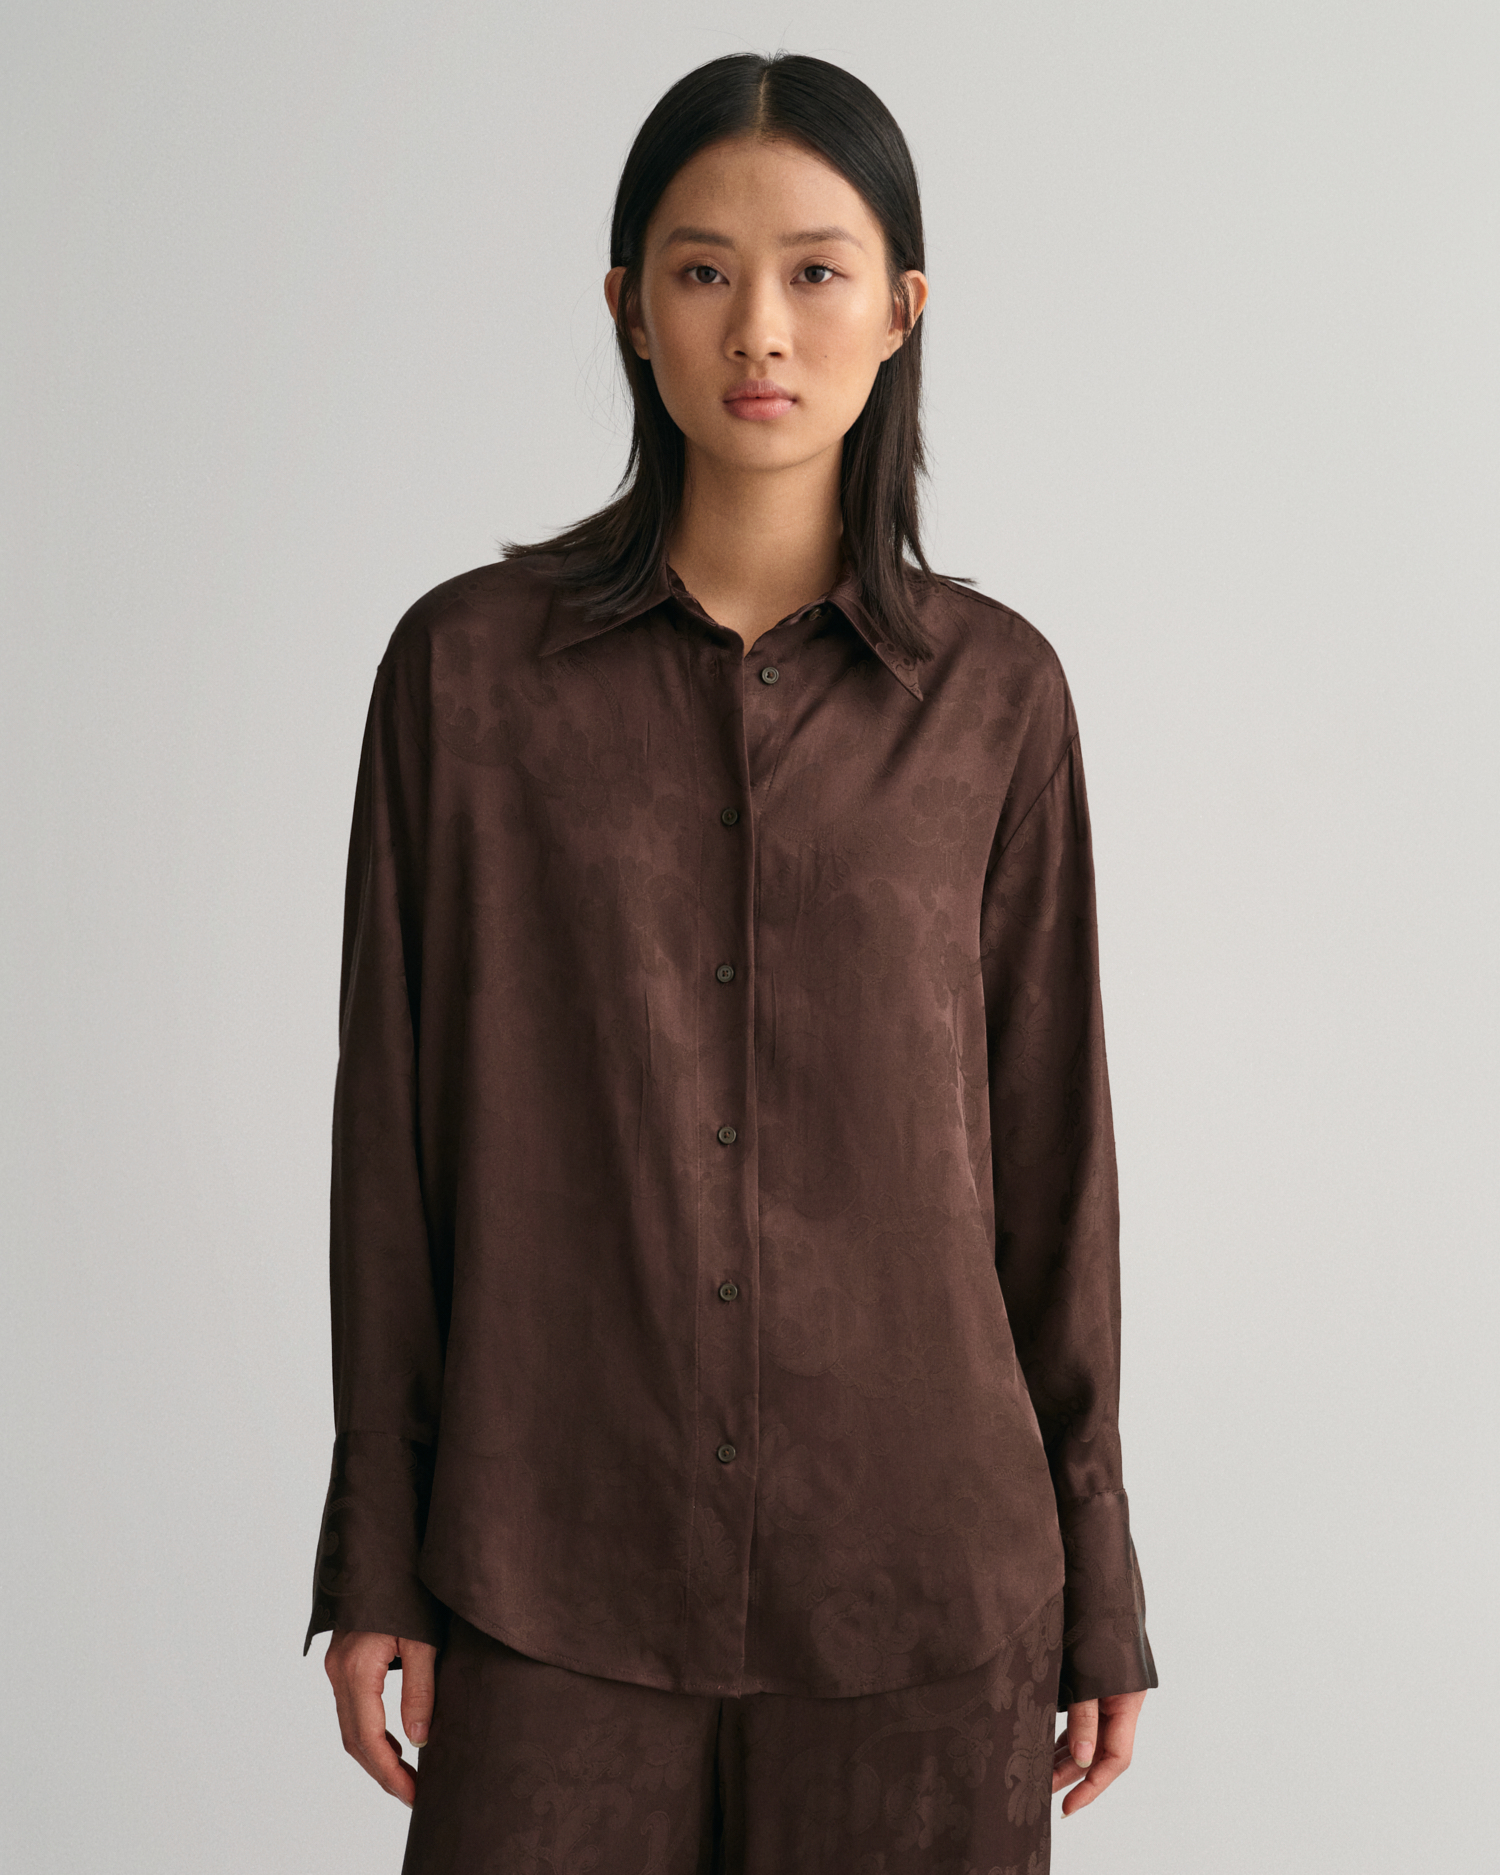 GANT Women Relaxed Fit Lace Jacquard Shirt ,